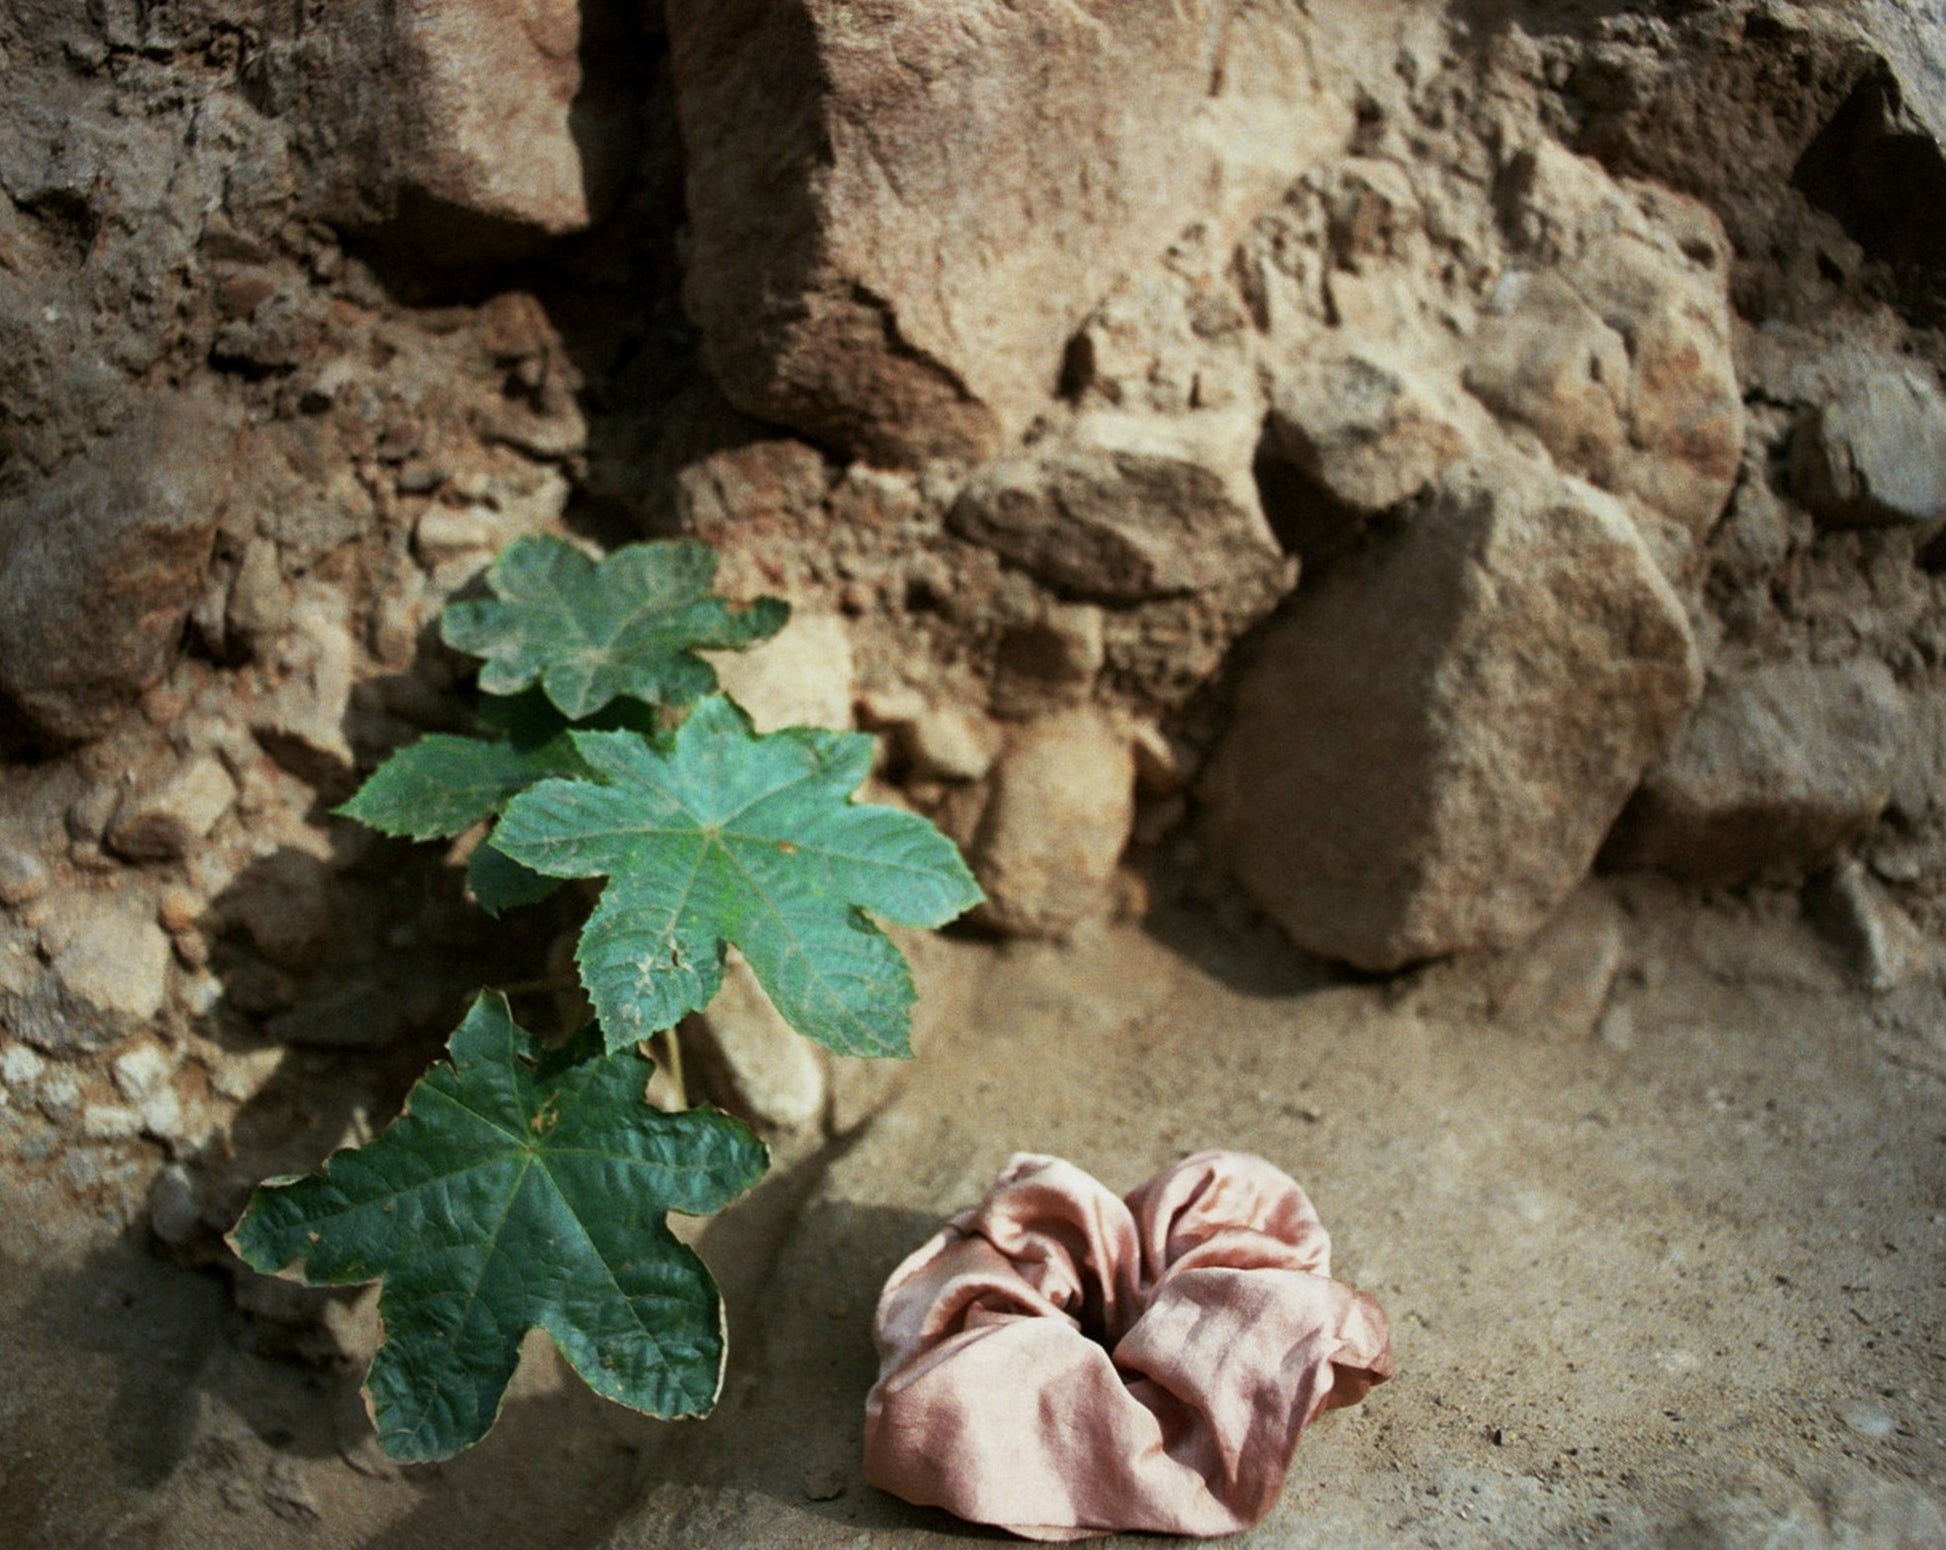 Goose Summer Apricot Scrunchie is a light pink silk scrunchie naturally dyed with cutch bark. The Apricot Scrunchie is displayed in nature against some rocks, and beside a green plant. The silk scrunchie is shining in the sun. 